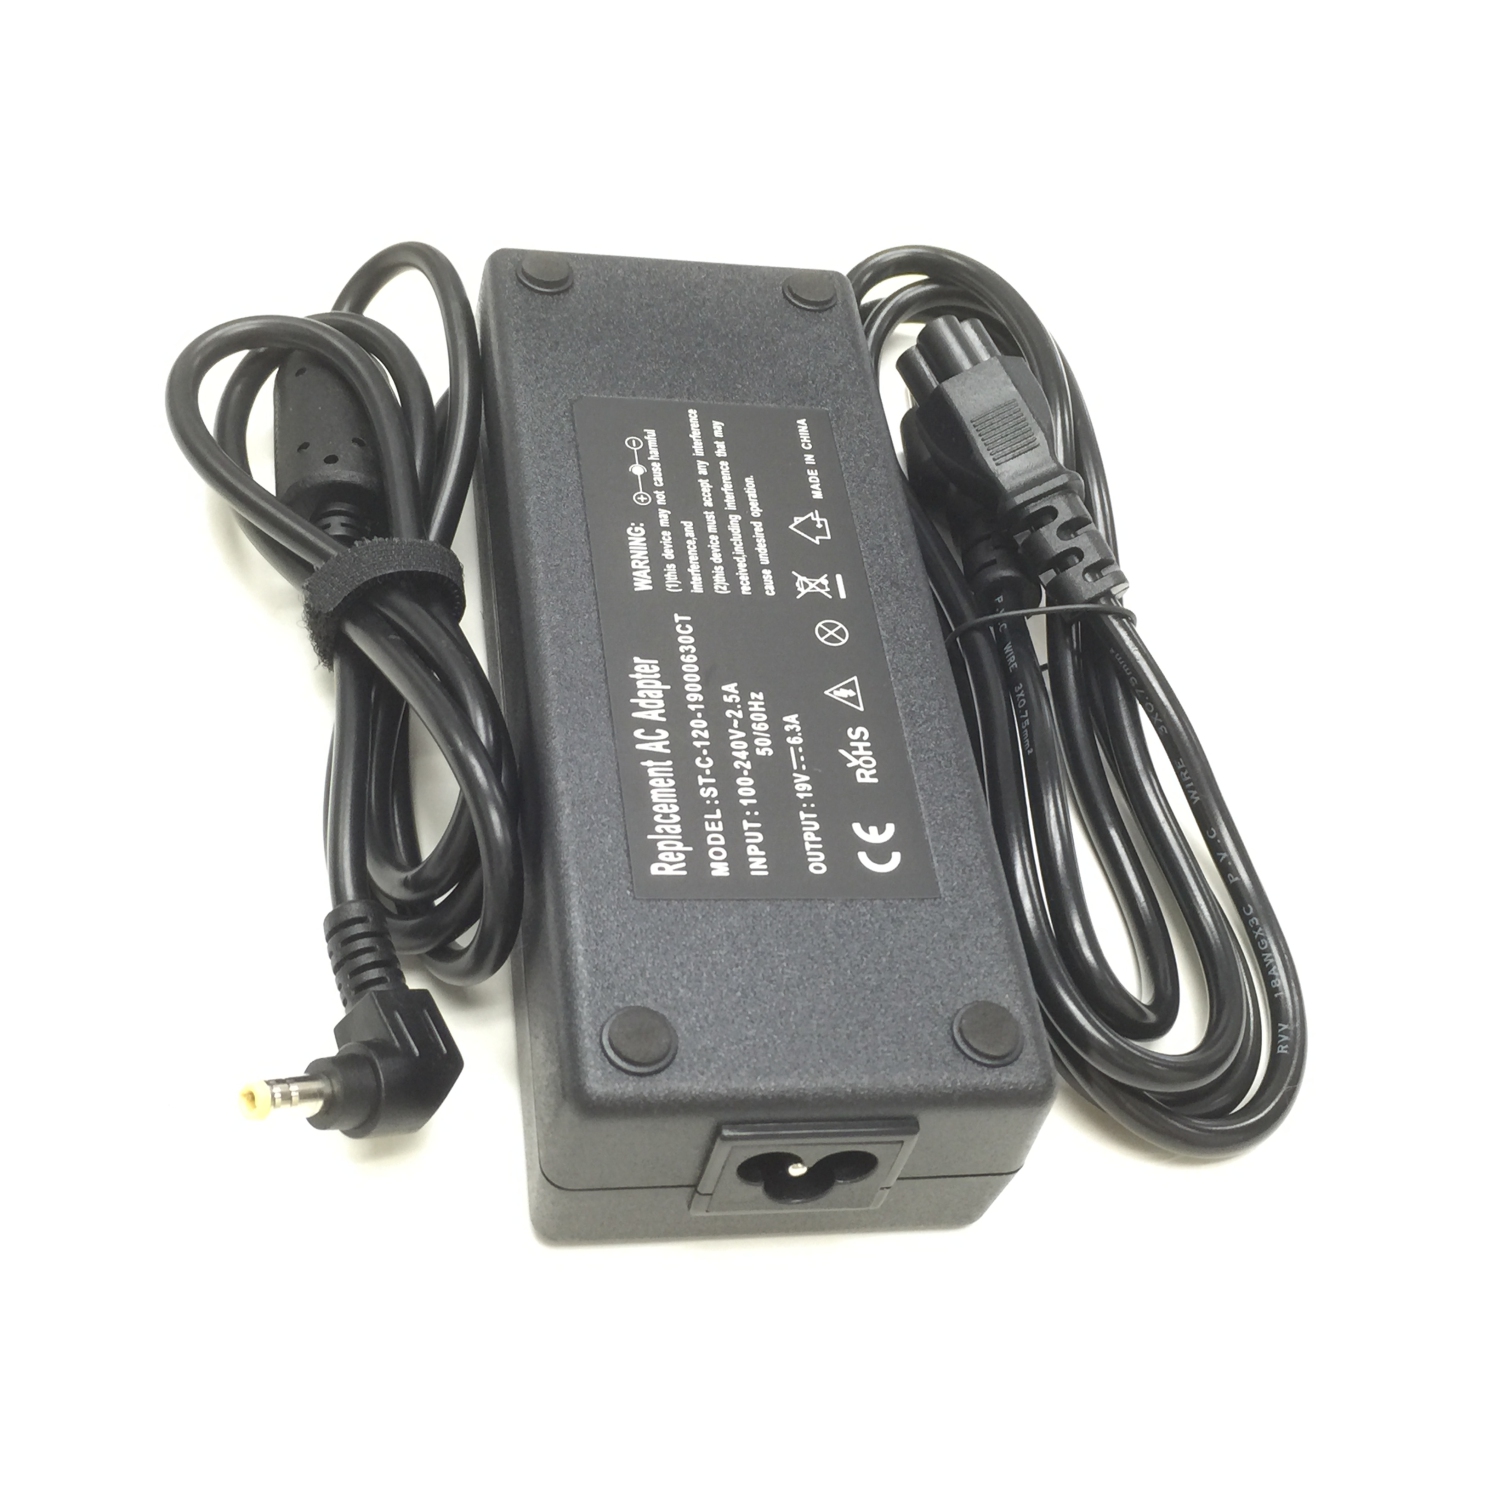 19V 6.3A 120W AC adapter charger for Asus UX501 UX501VX